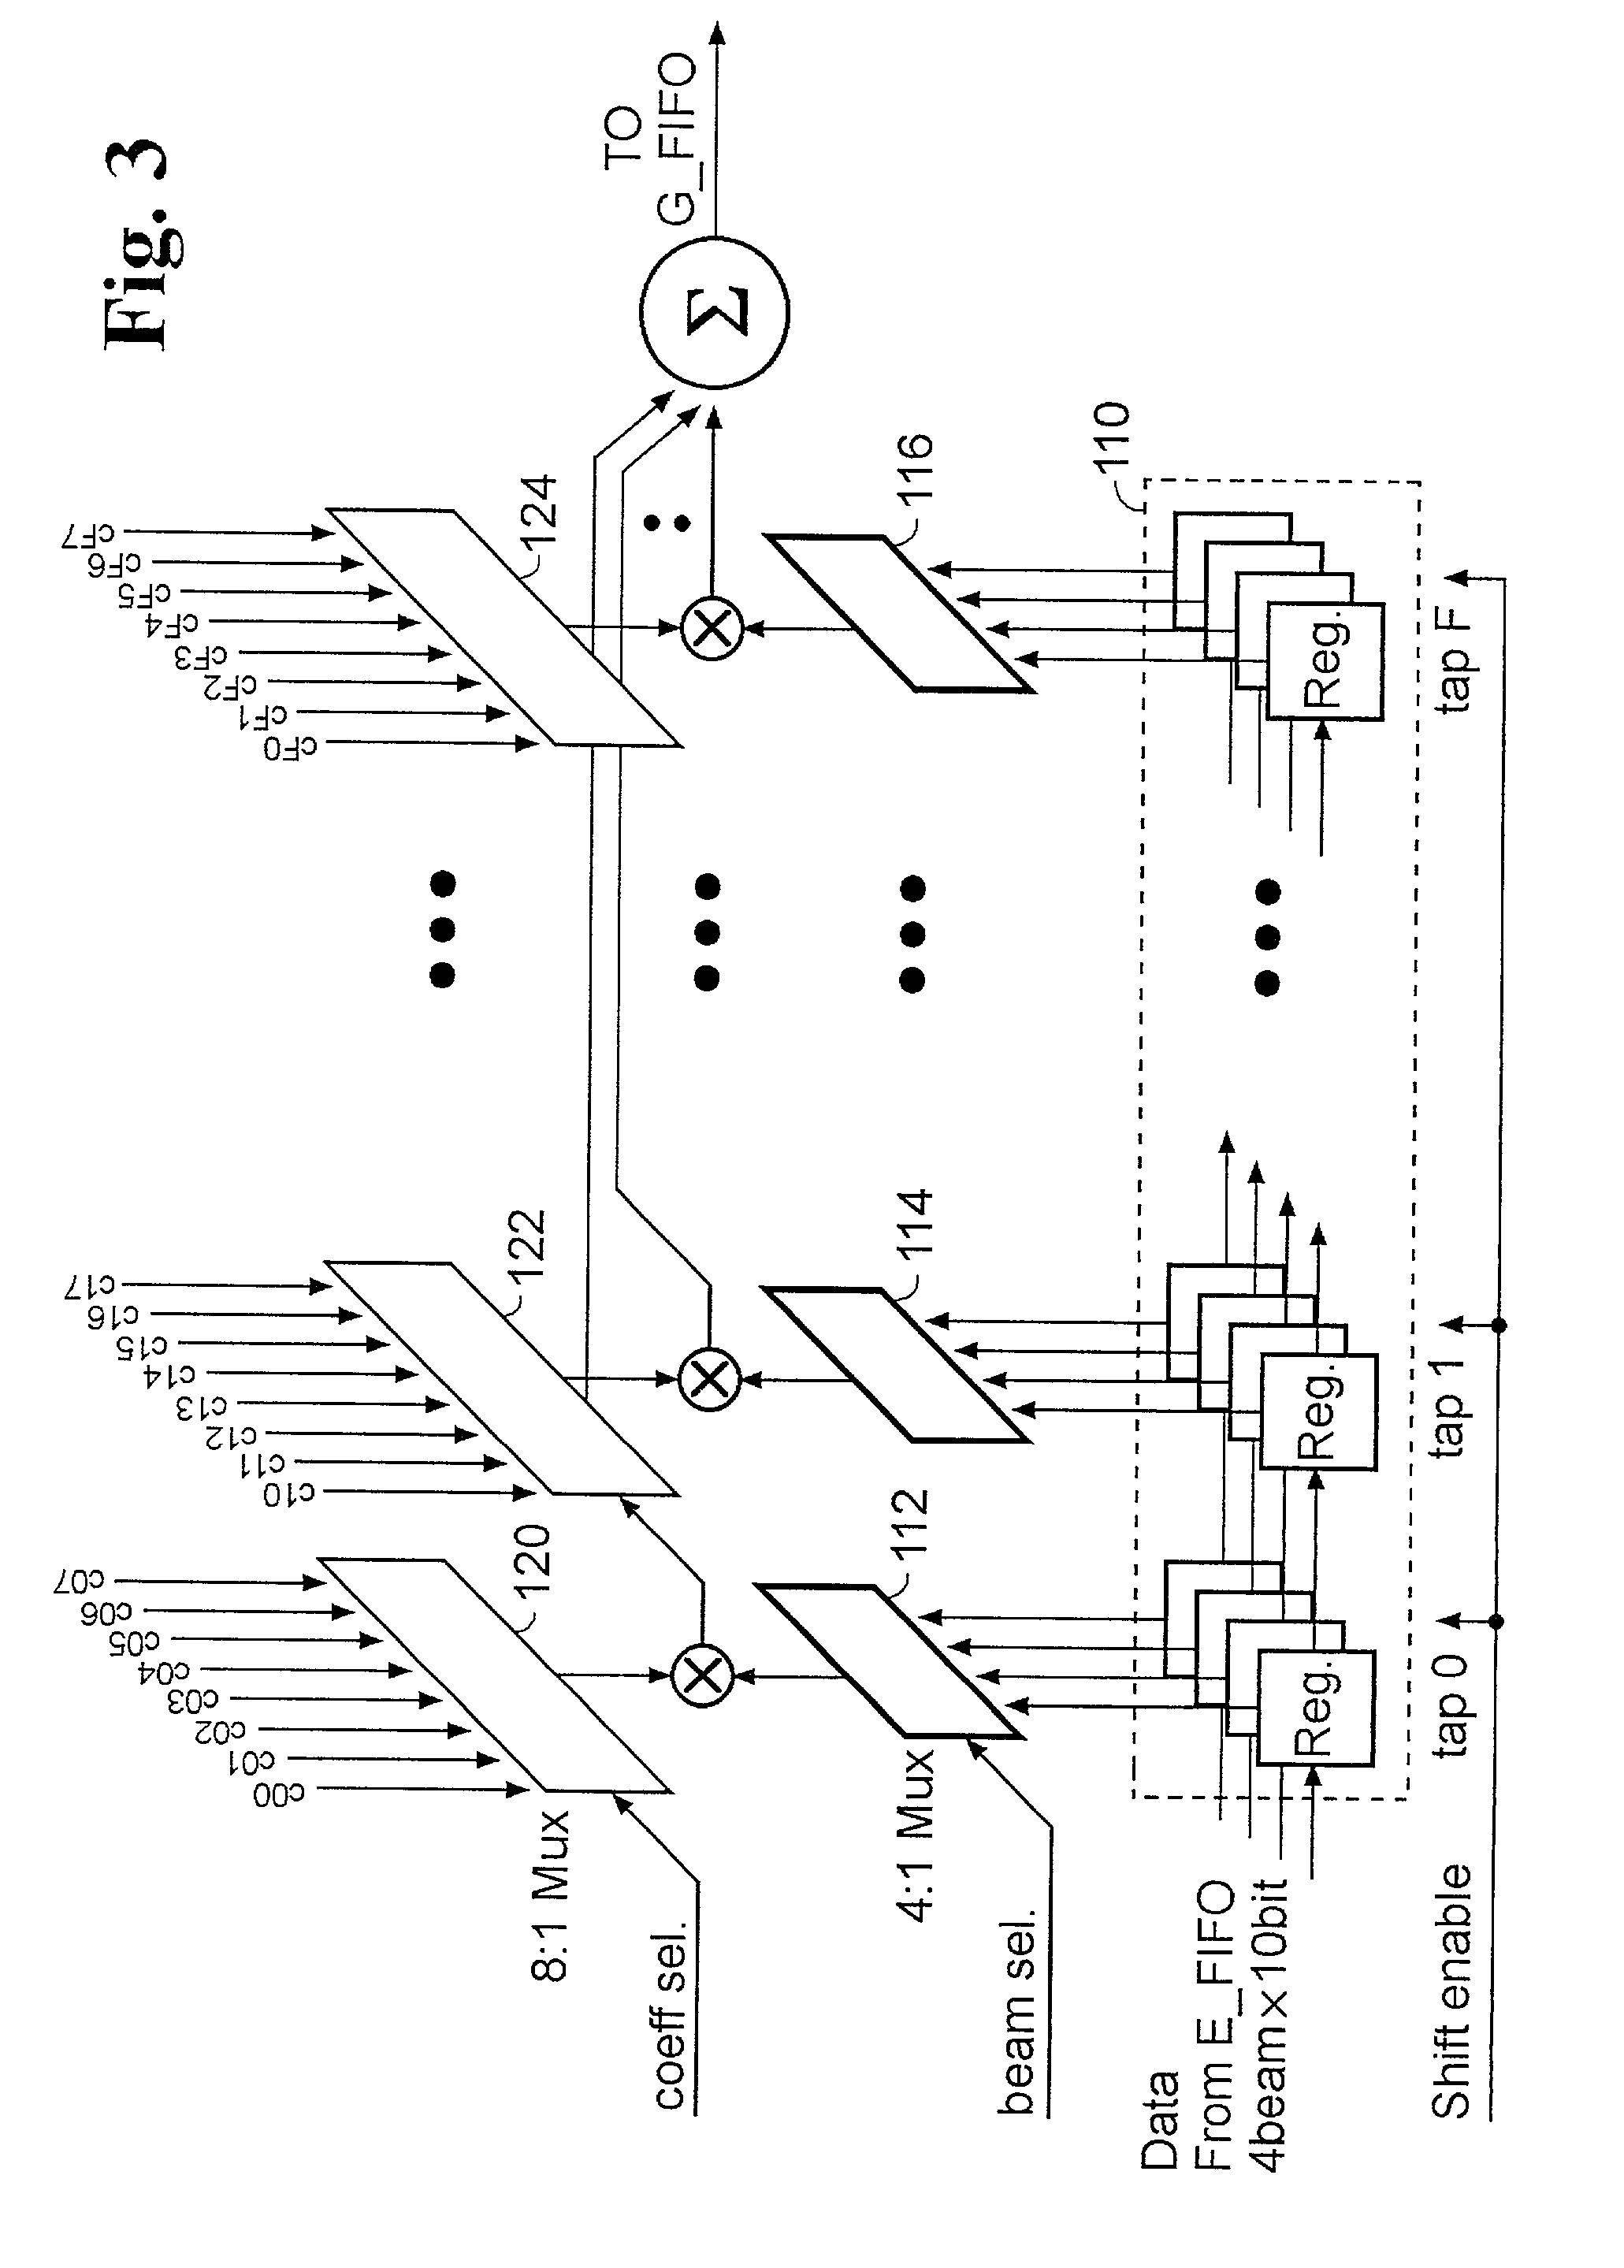 Ultrasound receive beamforming apparatus using multi stage delay devices